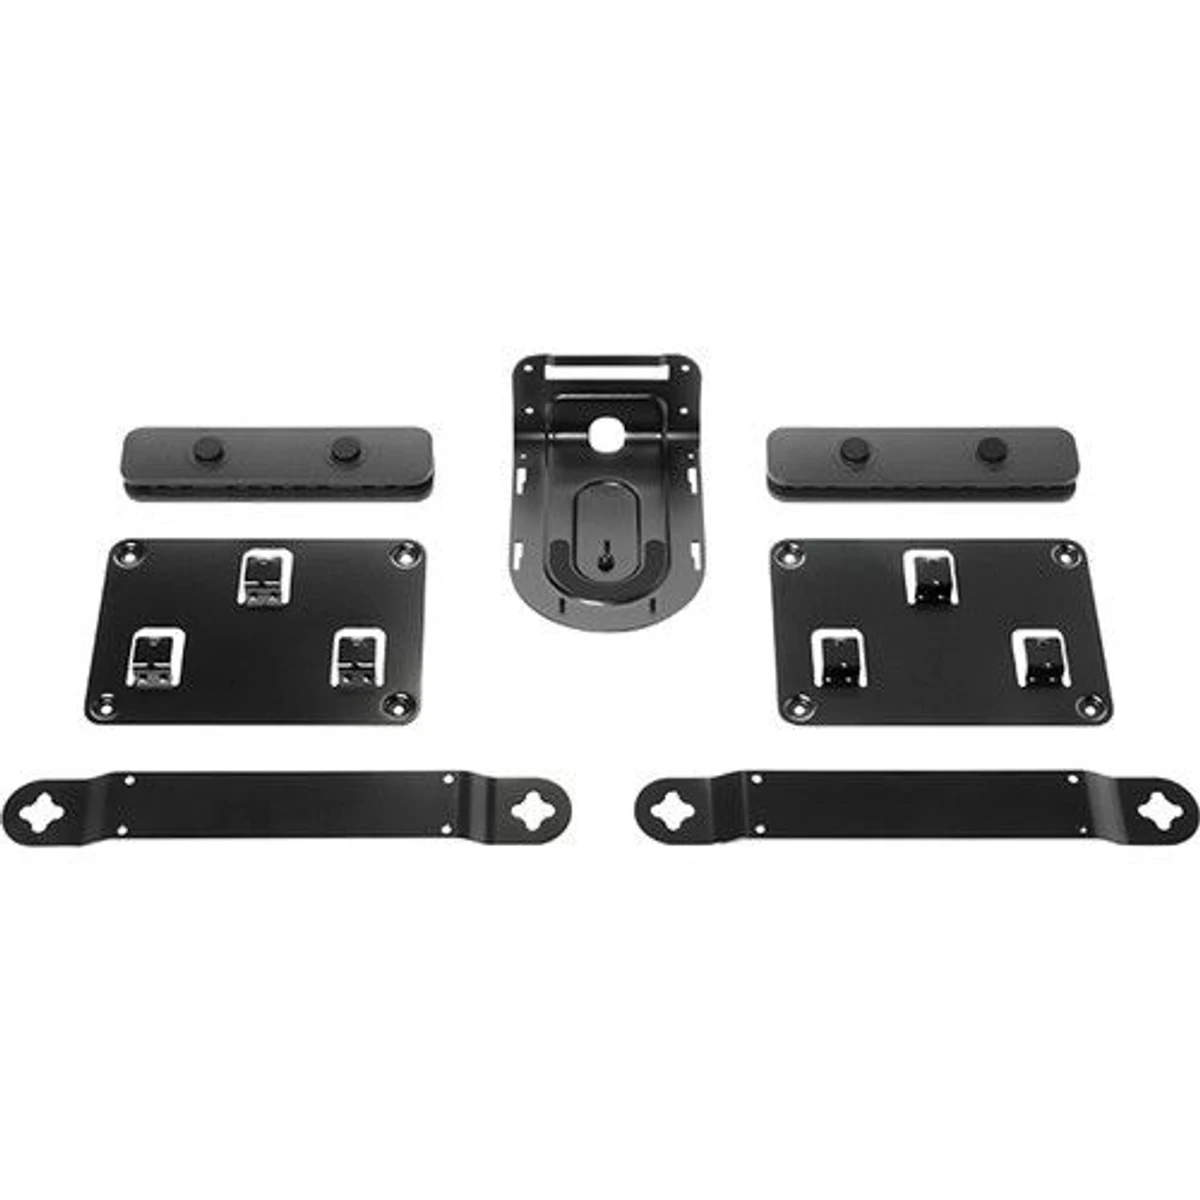 Logitech Mounting Kit For Rally Camera (939-001644)